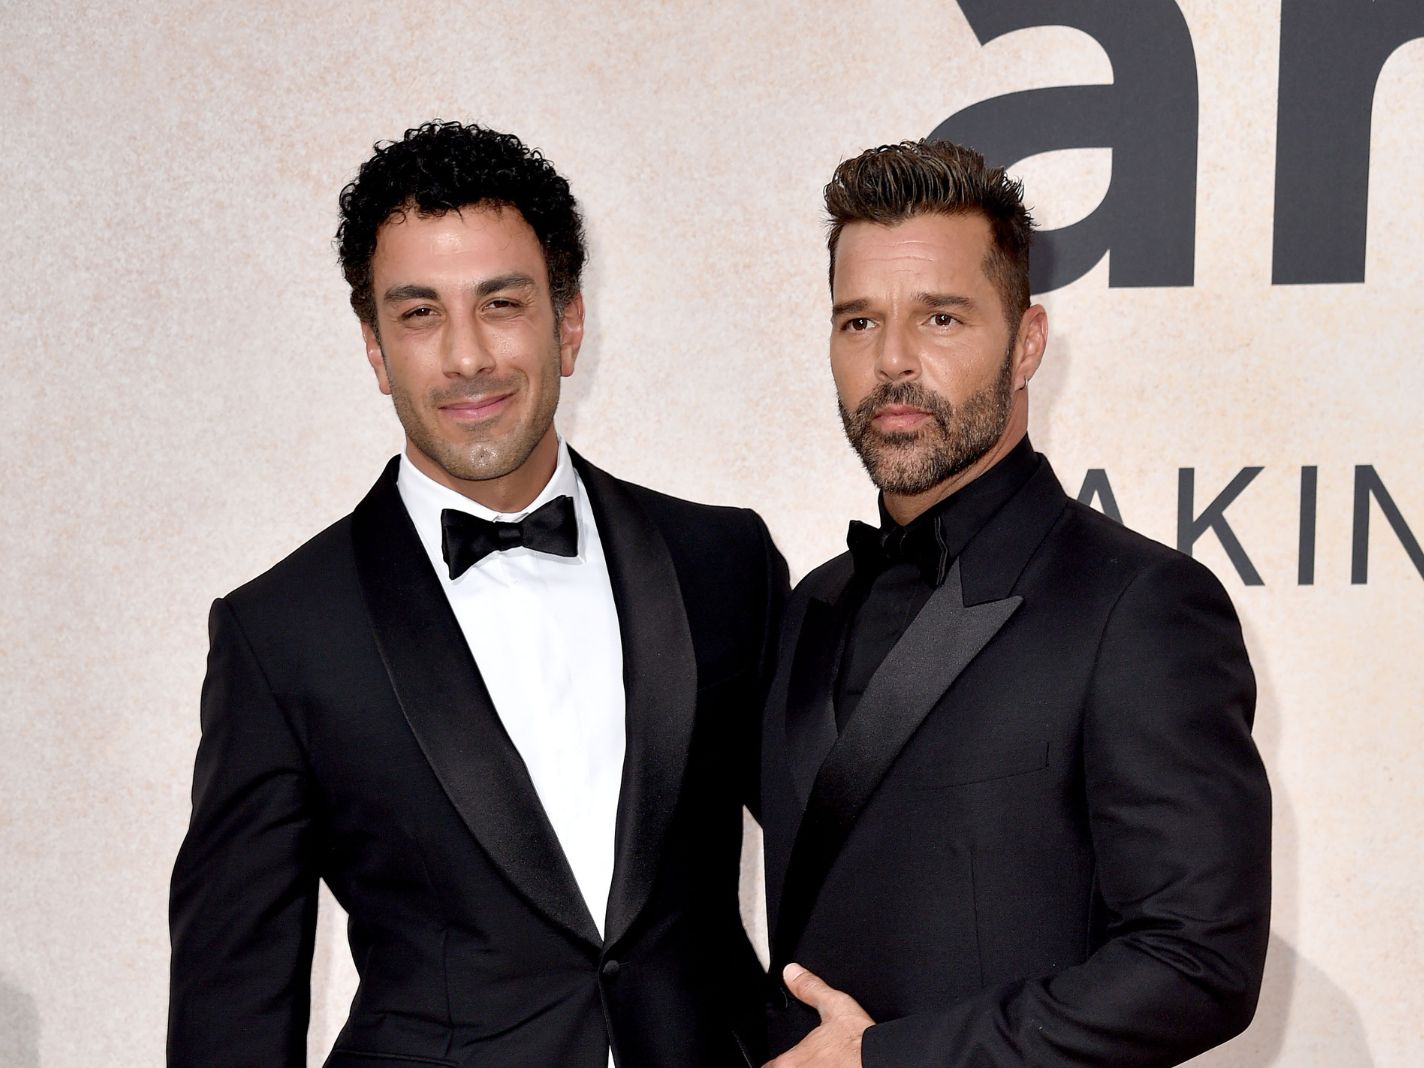 Ricky Martin & Jwan Yosef Announce Their Divorce After 6 Years of Marriage